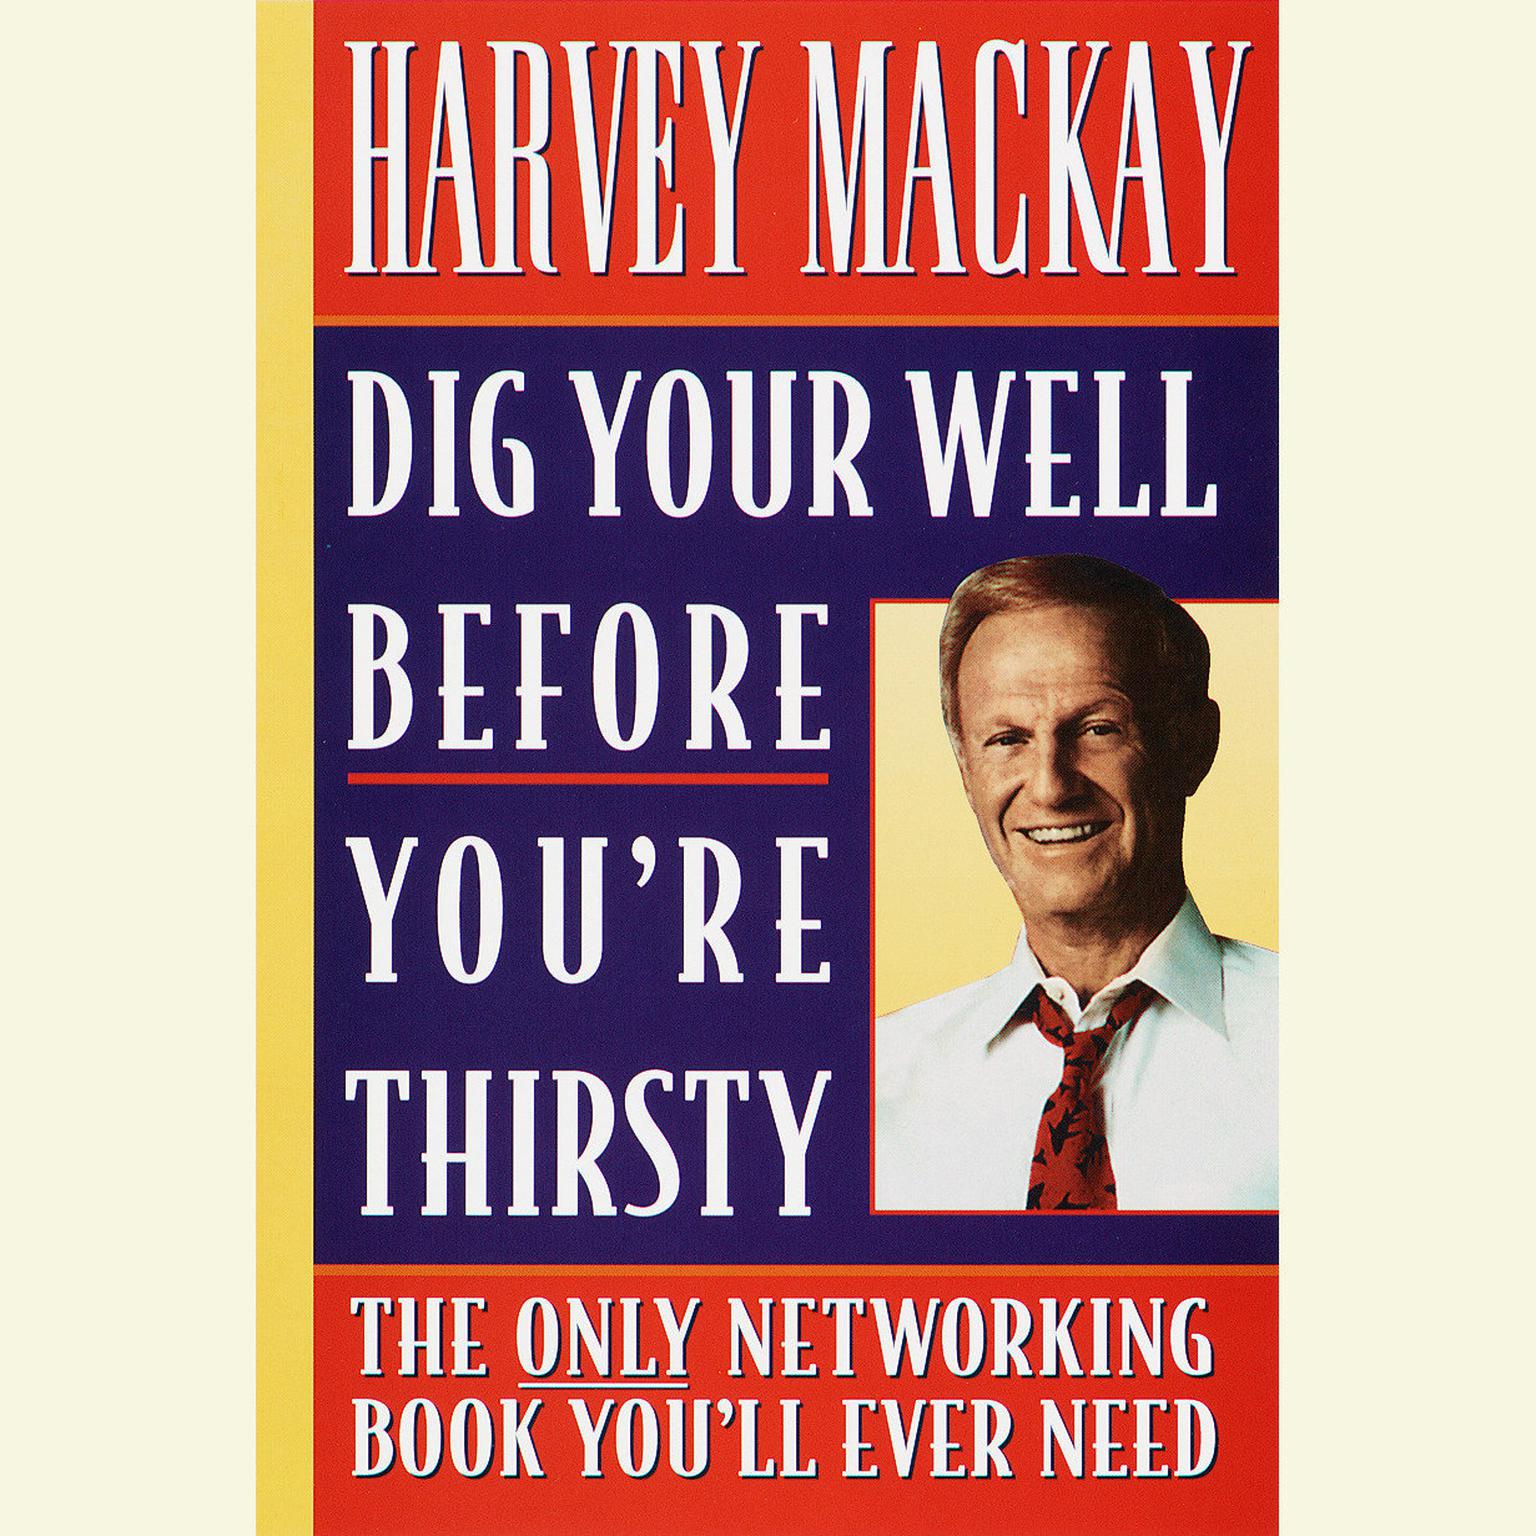 Dig Your Well Before Youre Thirsty (Abridged): The Only Networking Book Youll Ever Need Audiobook, by Harvey Mackay